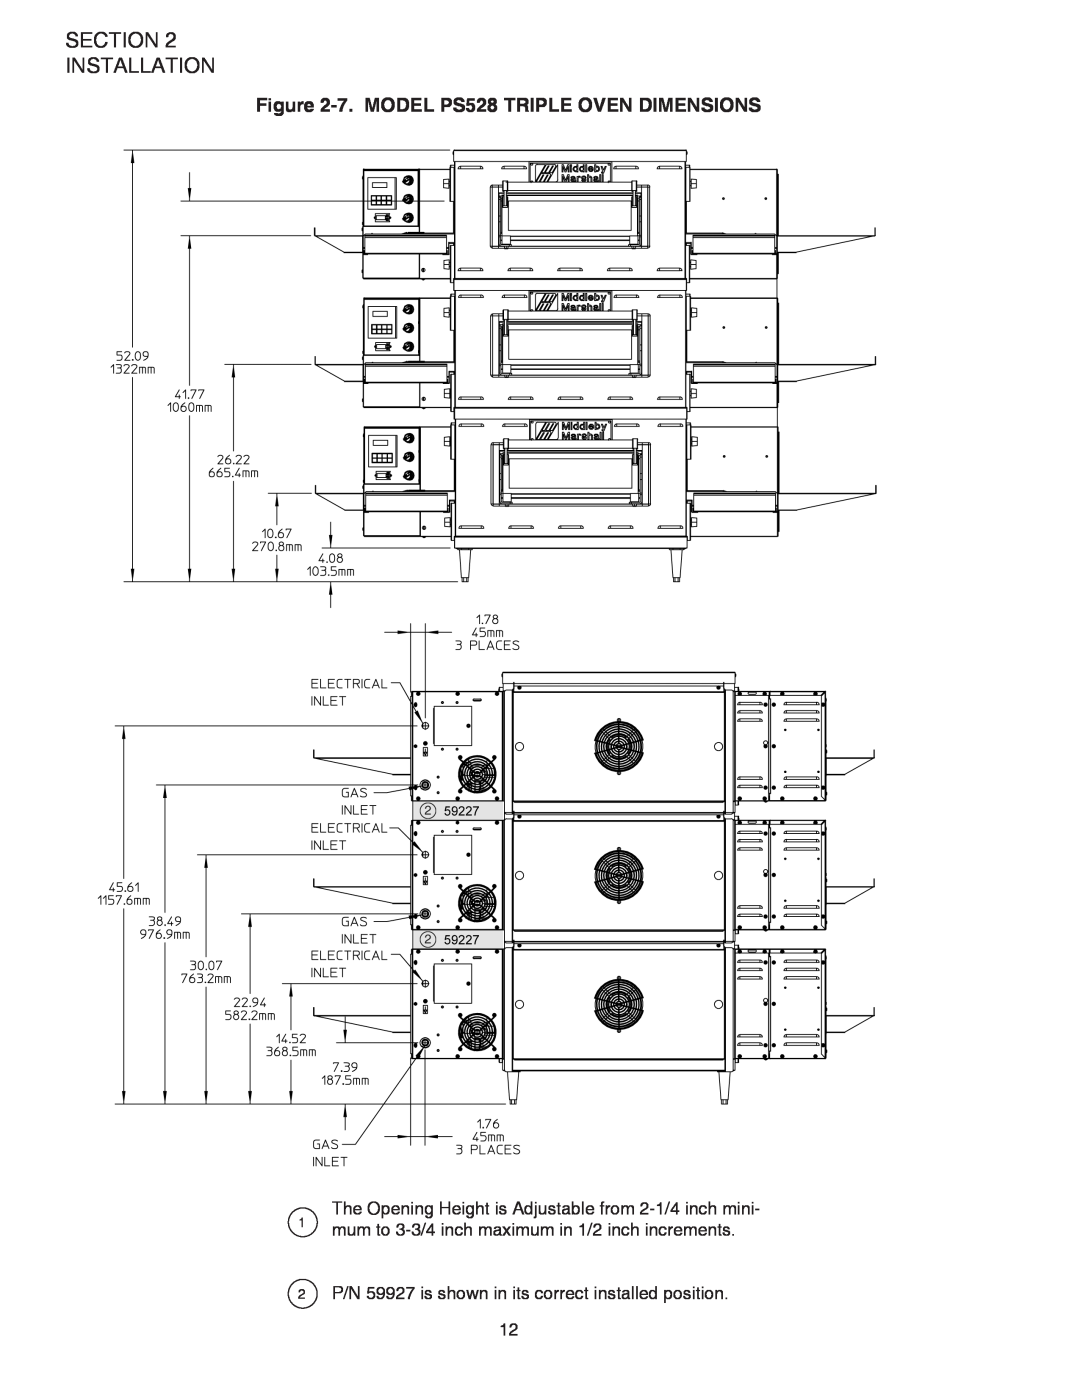 Middleby Marshall PS528G installation manual Section Installation, 7.MODEL PS528 TRIPLE OVEN DIMENSIONS 